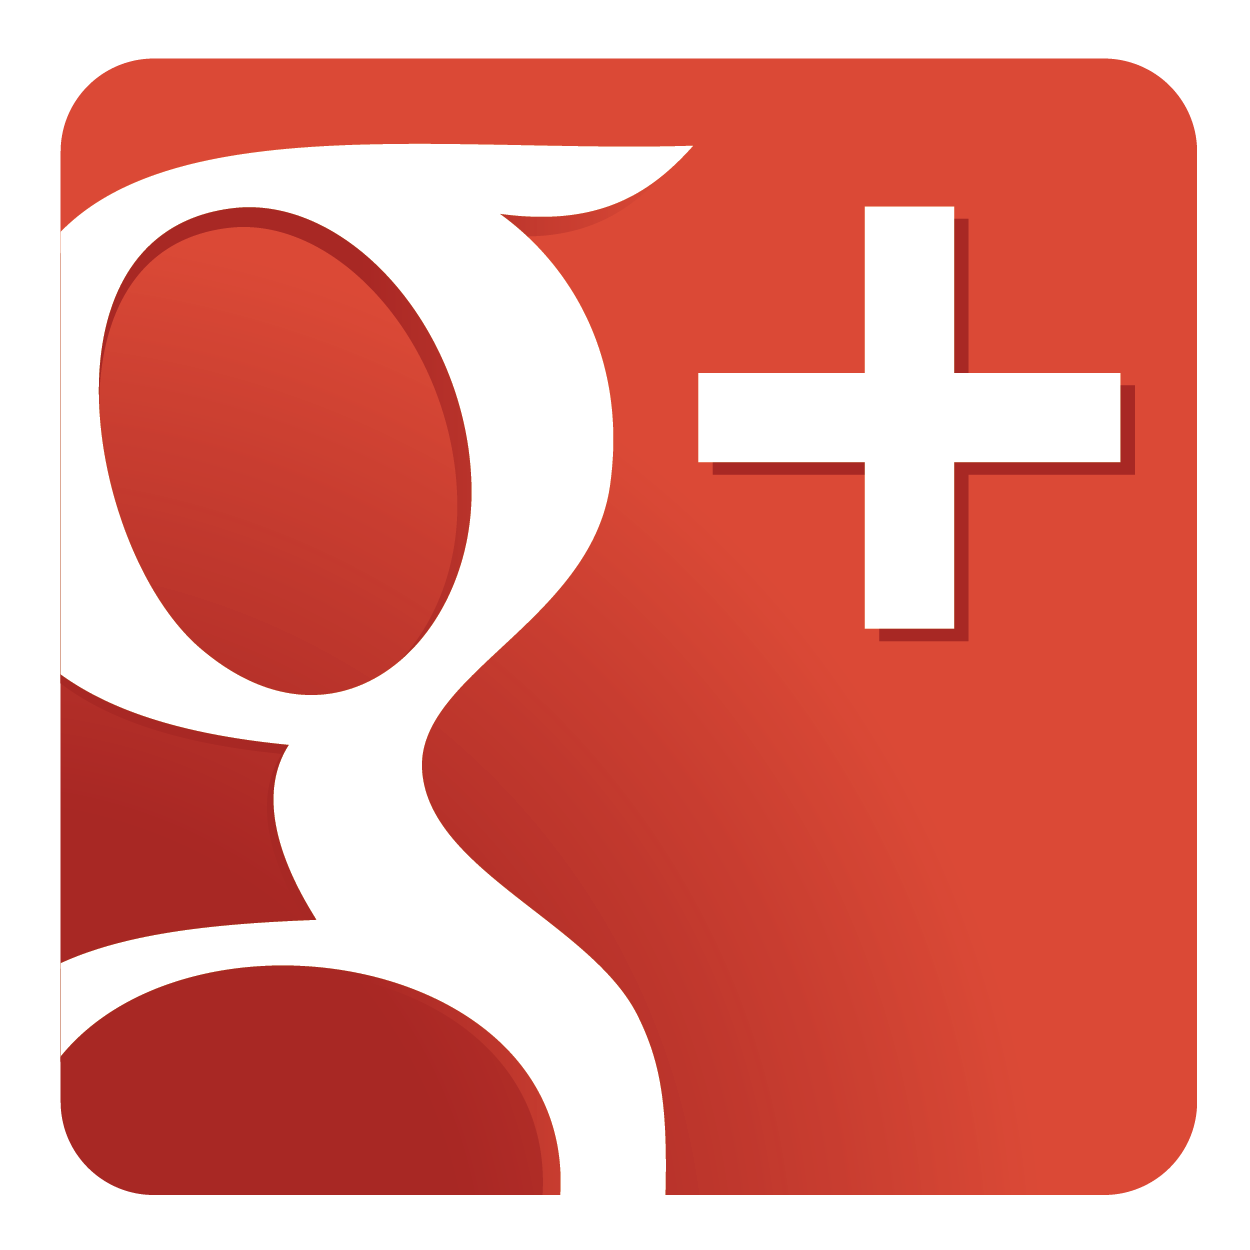 Our profile on Google+